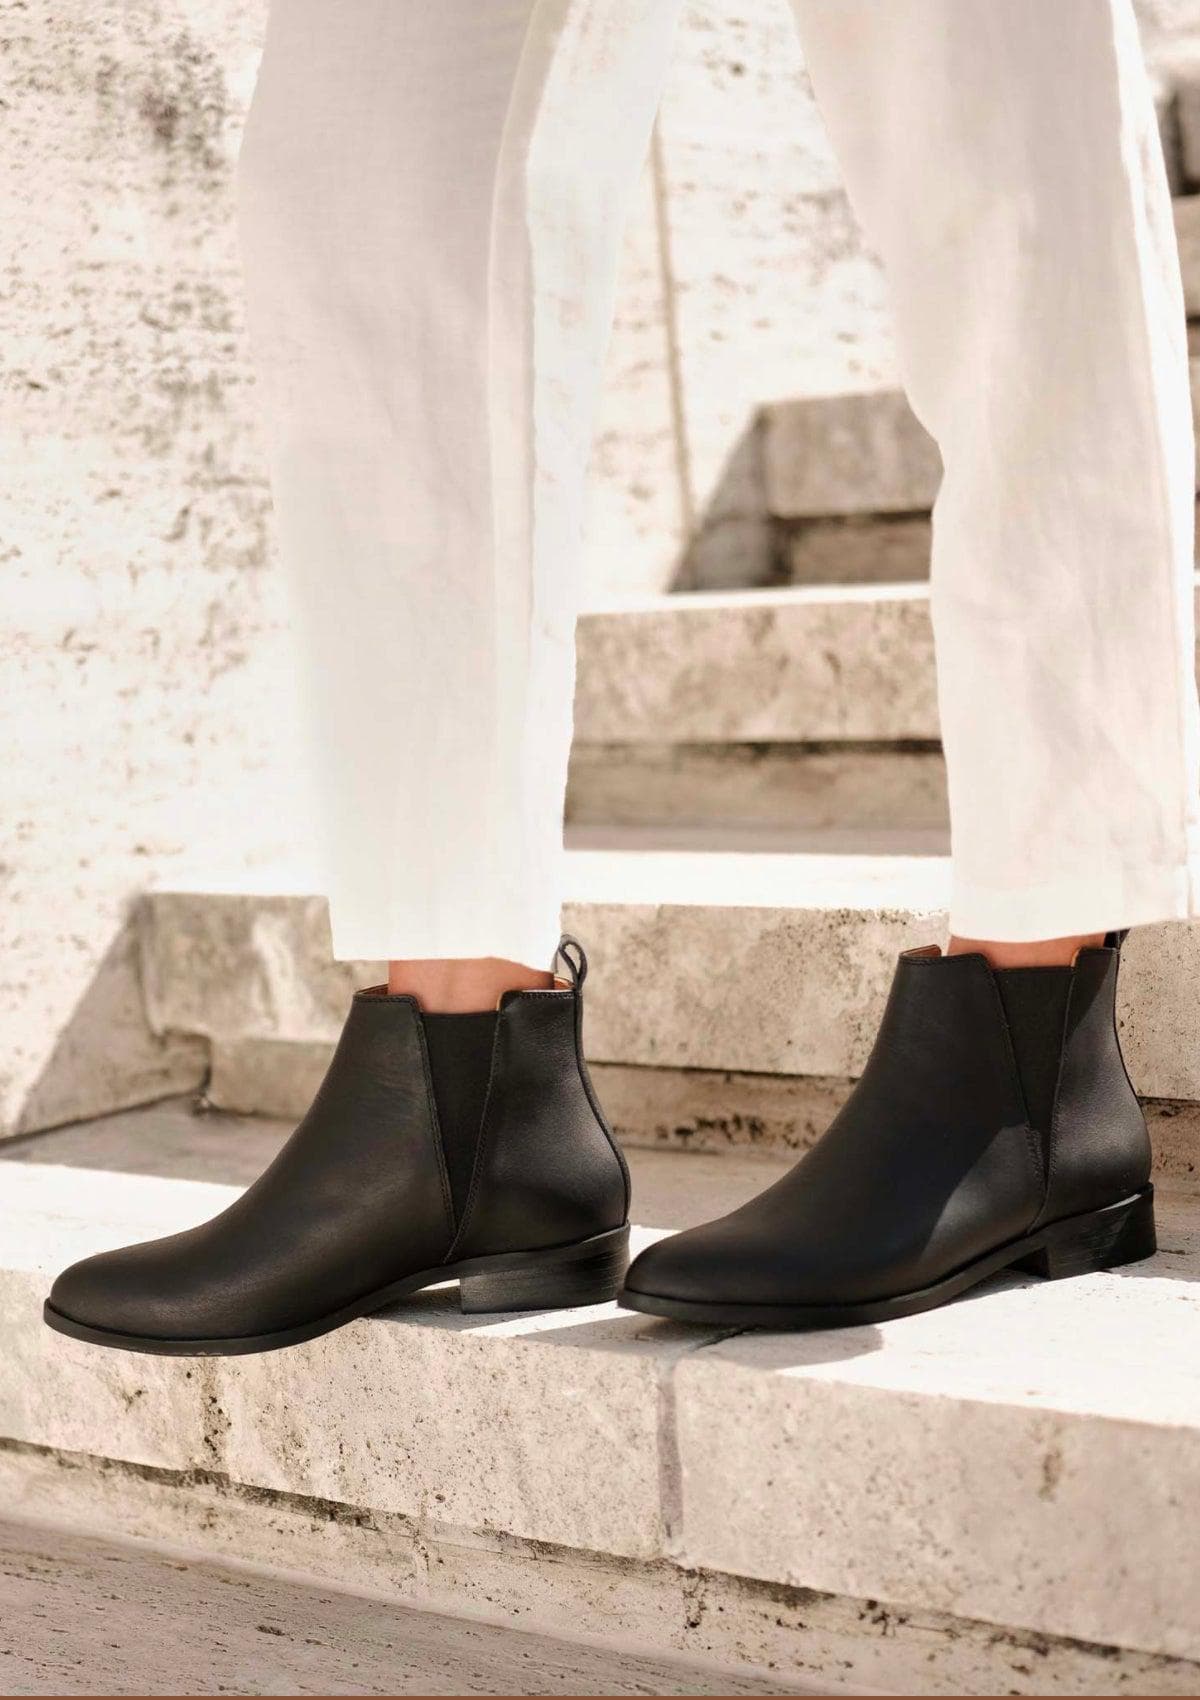 Nisolo Everyday Chelsea Boot - Commuter Black